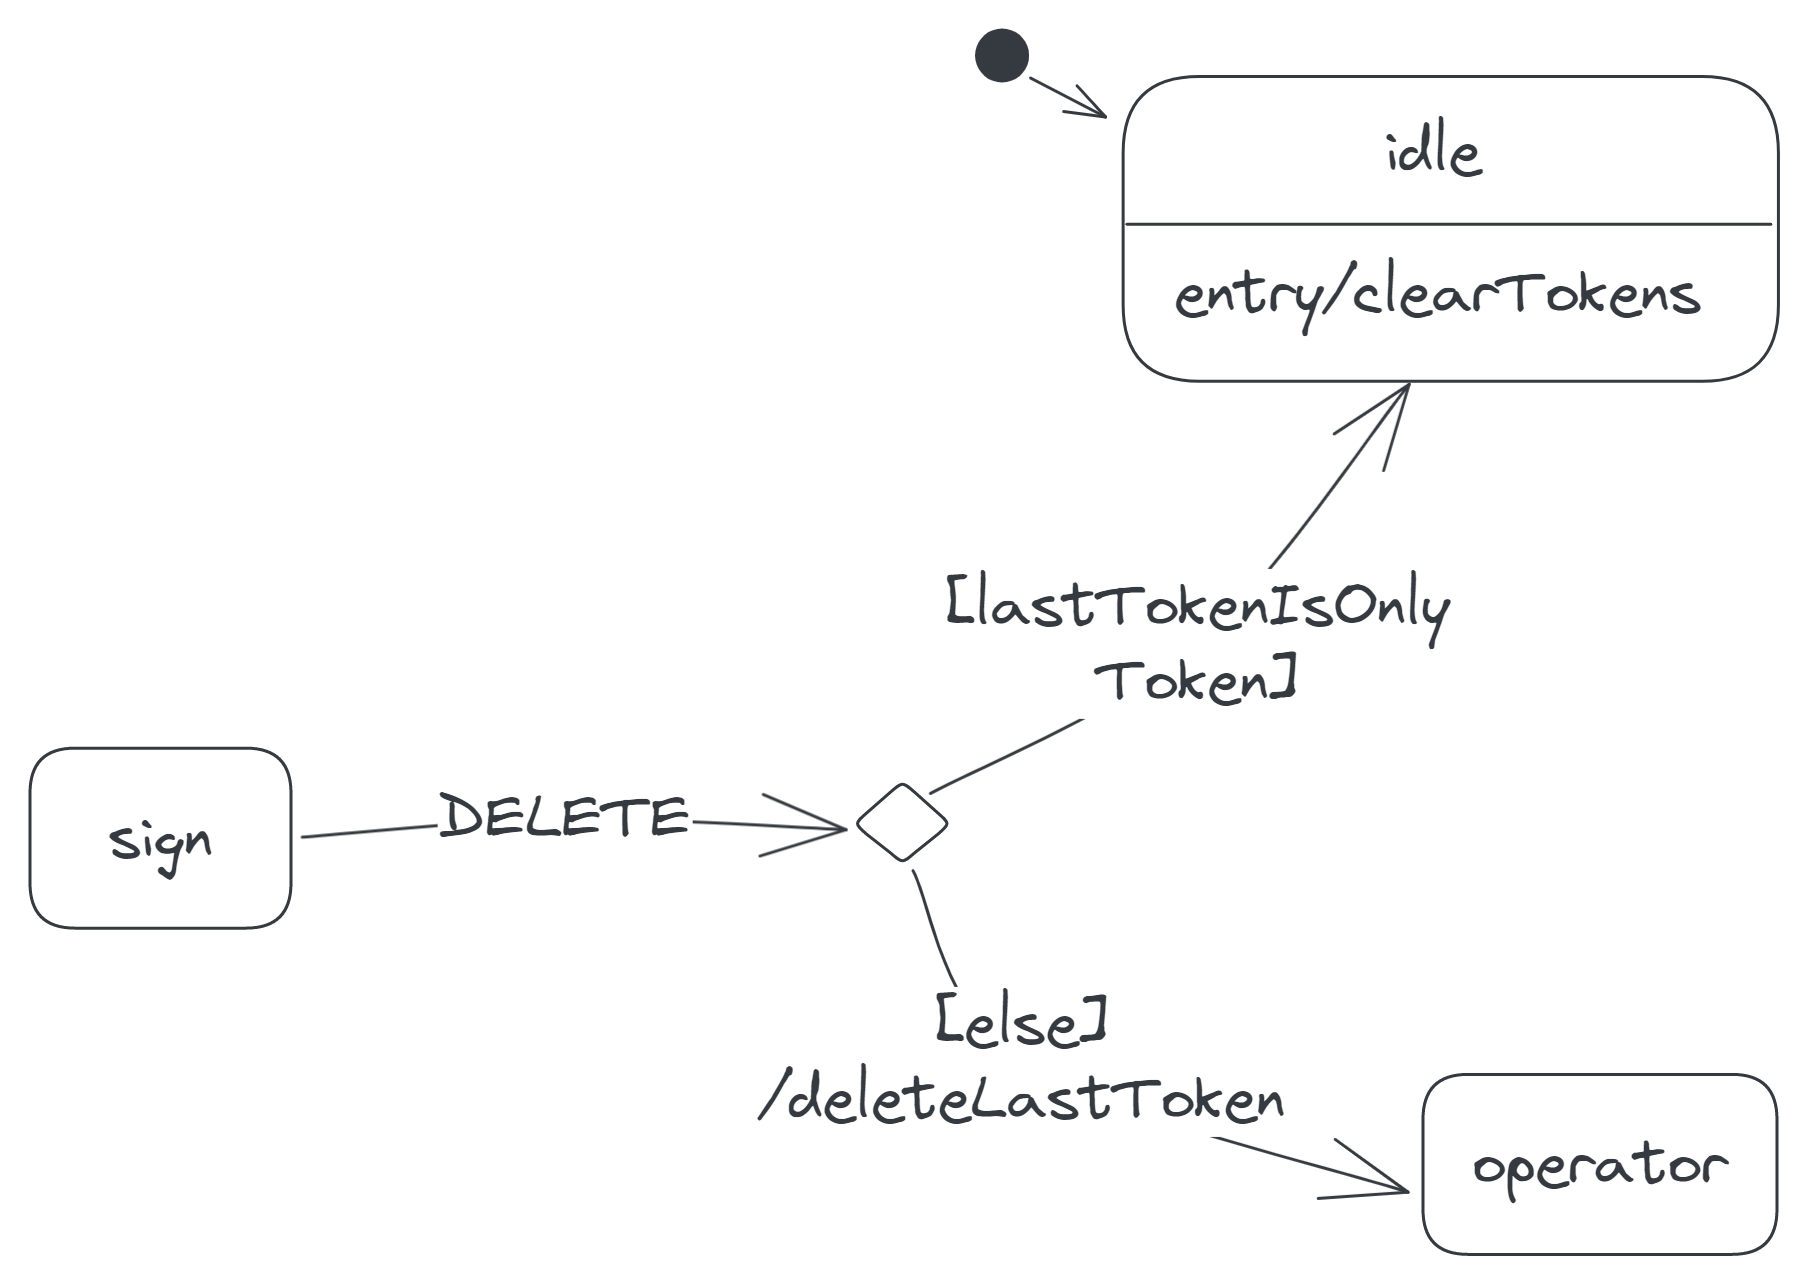 Two DELETE transitions from the sign state: one labelled '[lastTokenIsOnlyToken]' entering the idle state, and another labelled '[else]/deleteLastToken' entering the operator state.